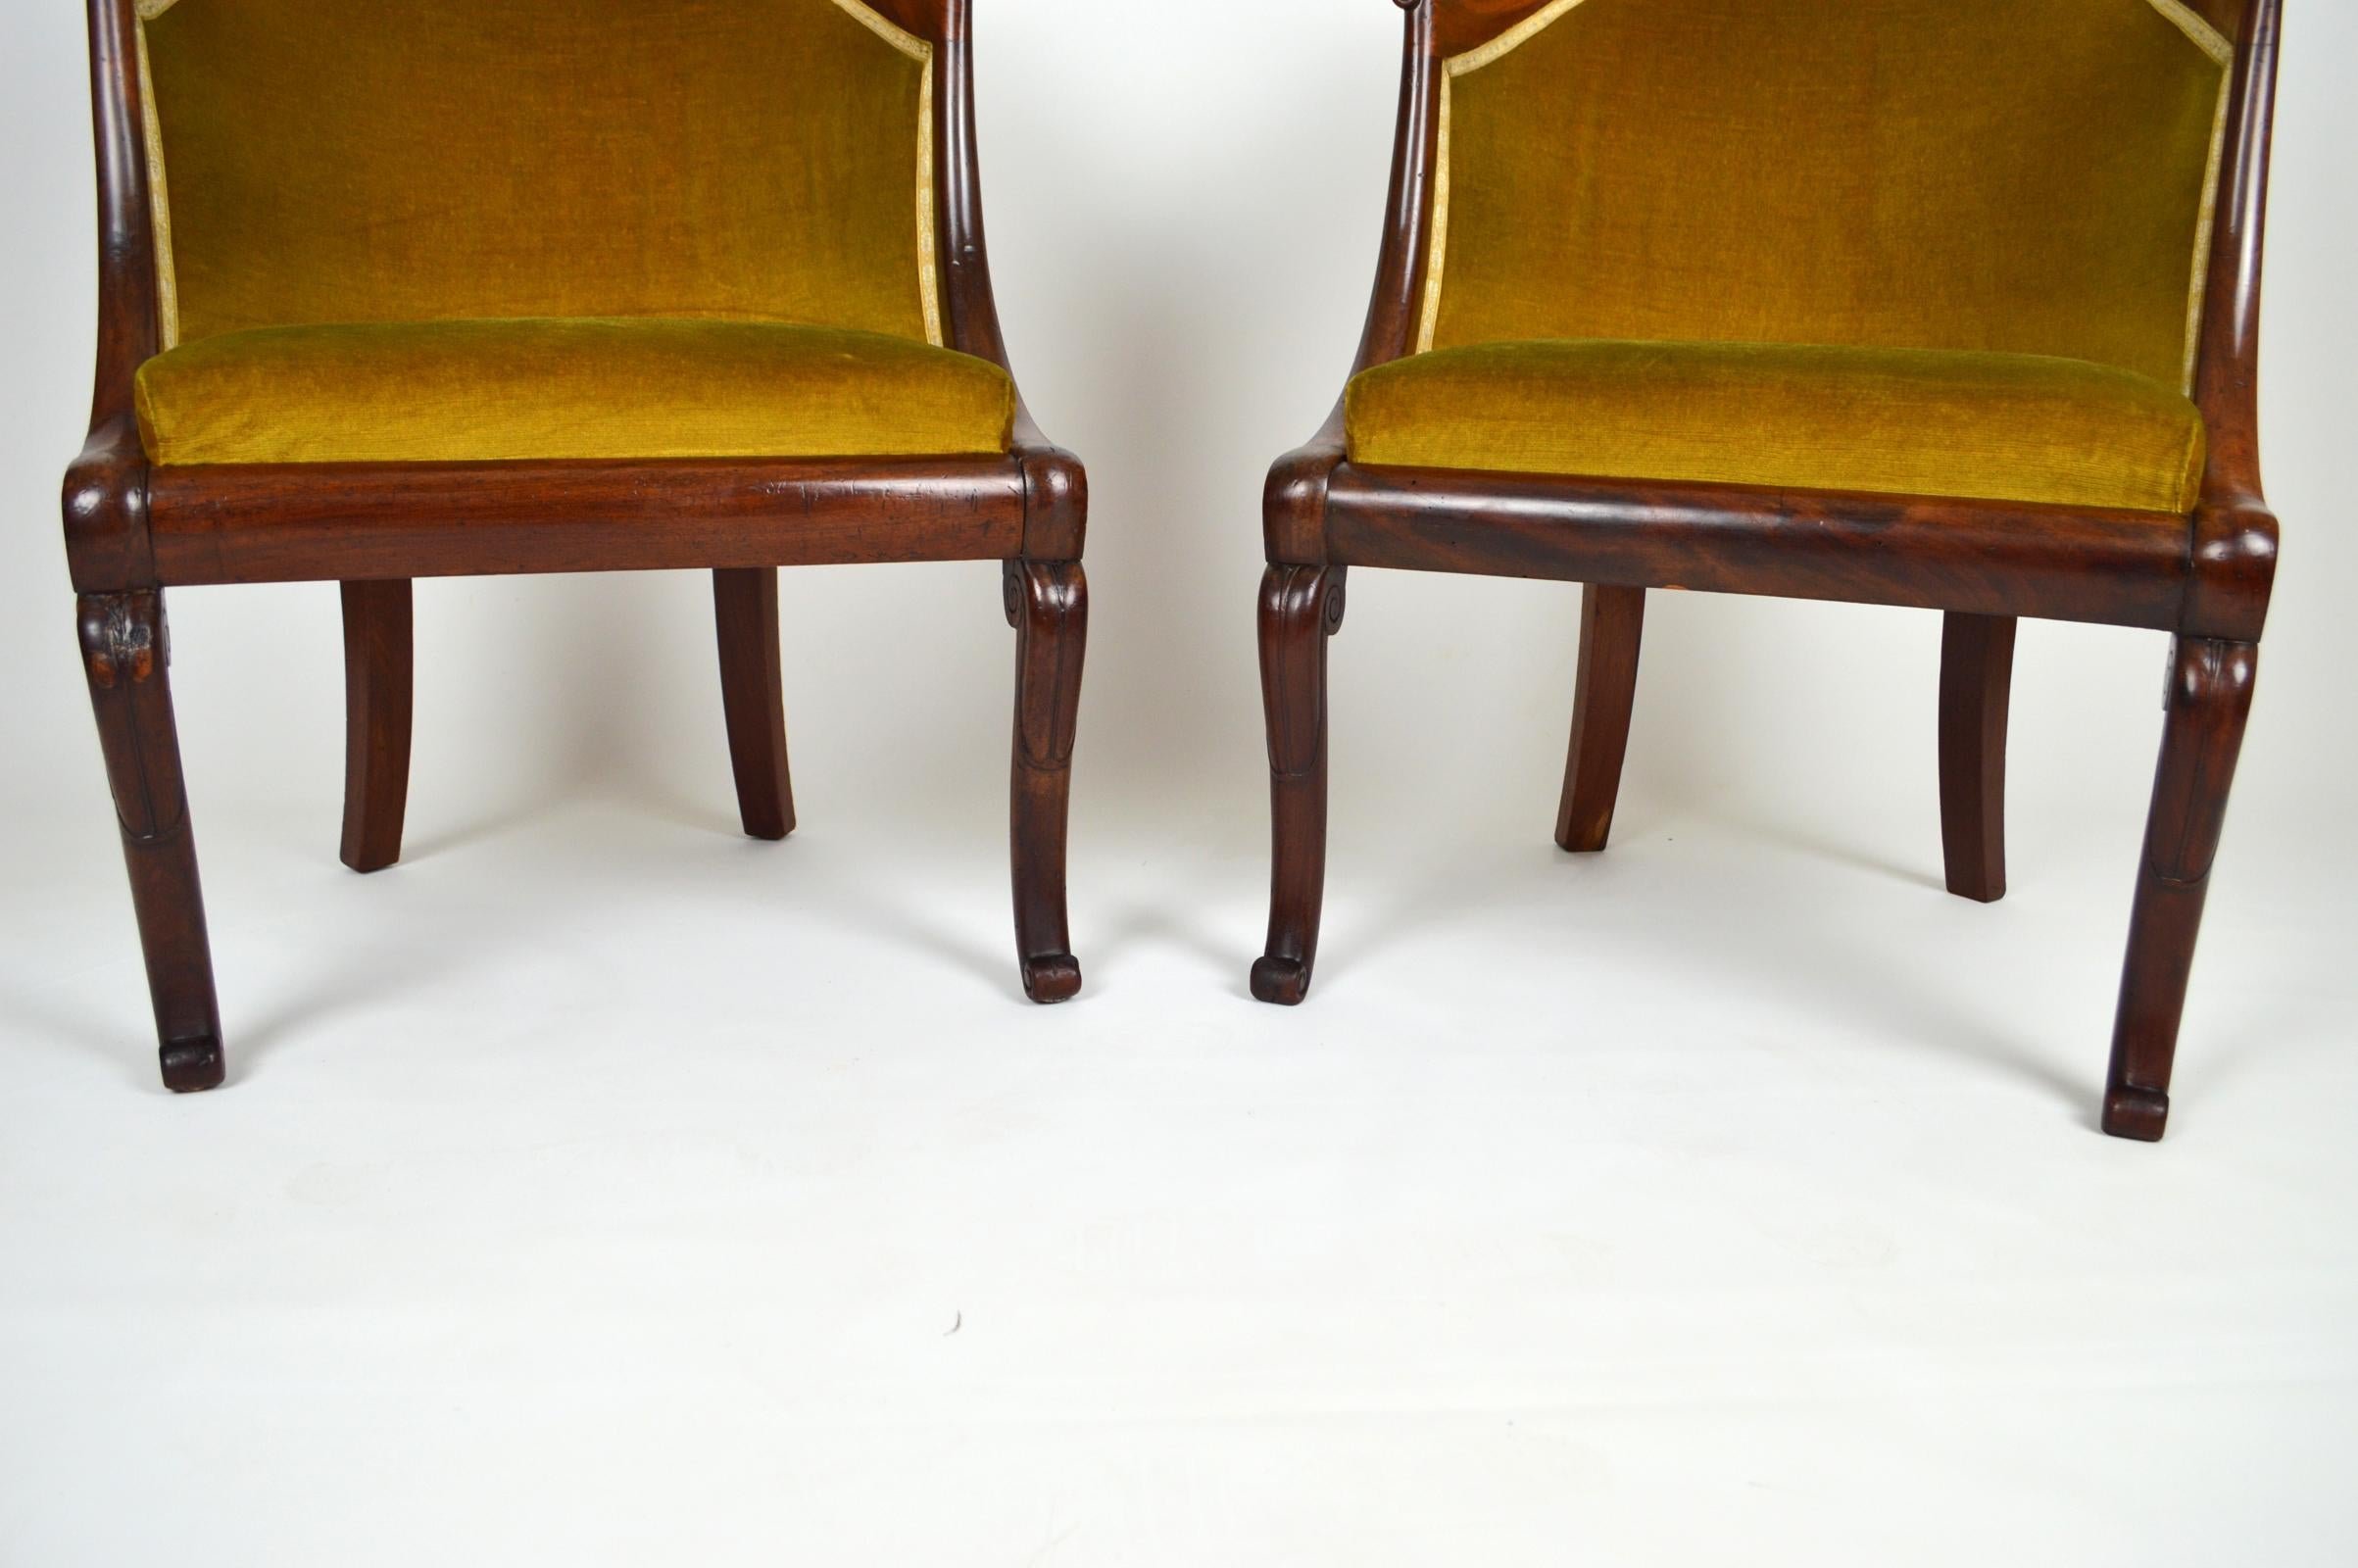 Pair of Armchairs / Tub Chairs in Carved Mahogany, France, Early 19th Century For Sale 3